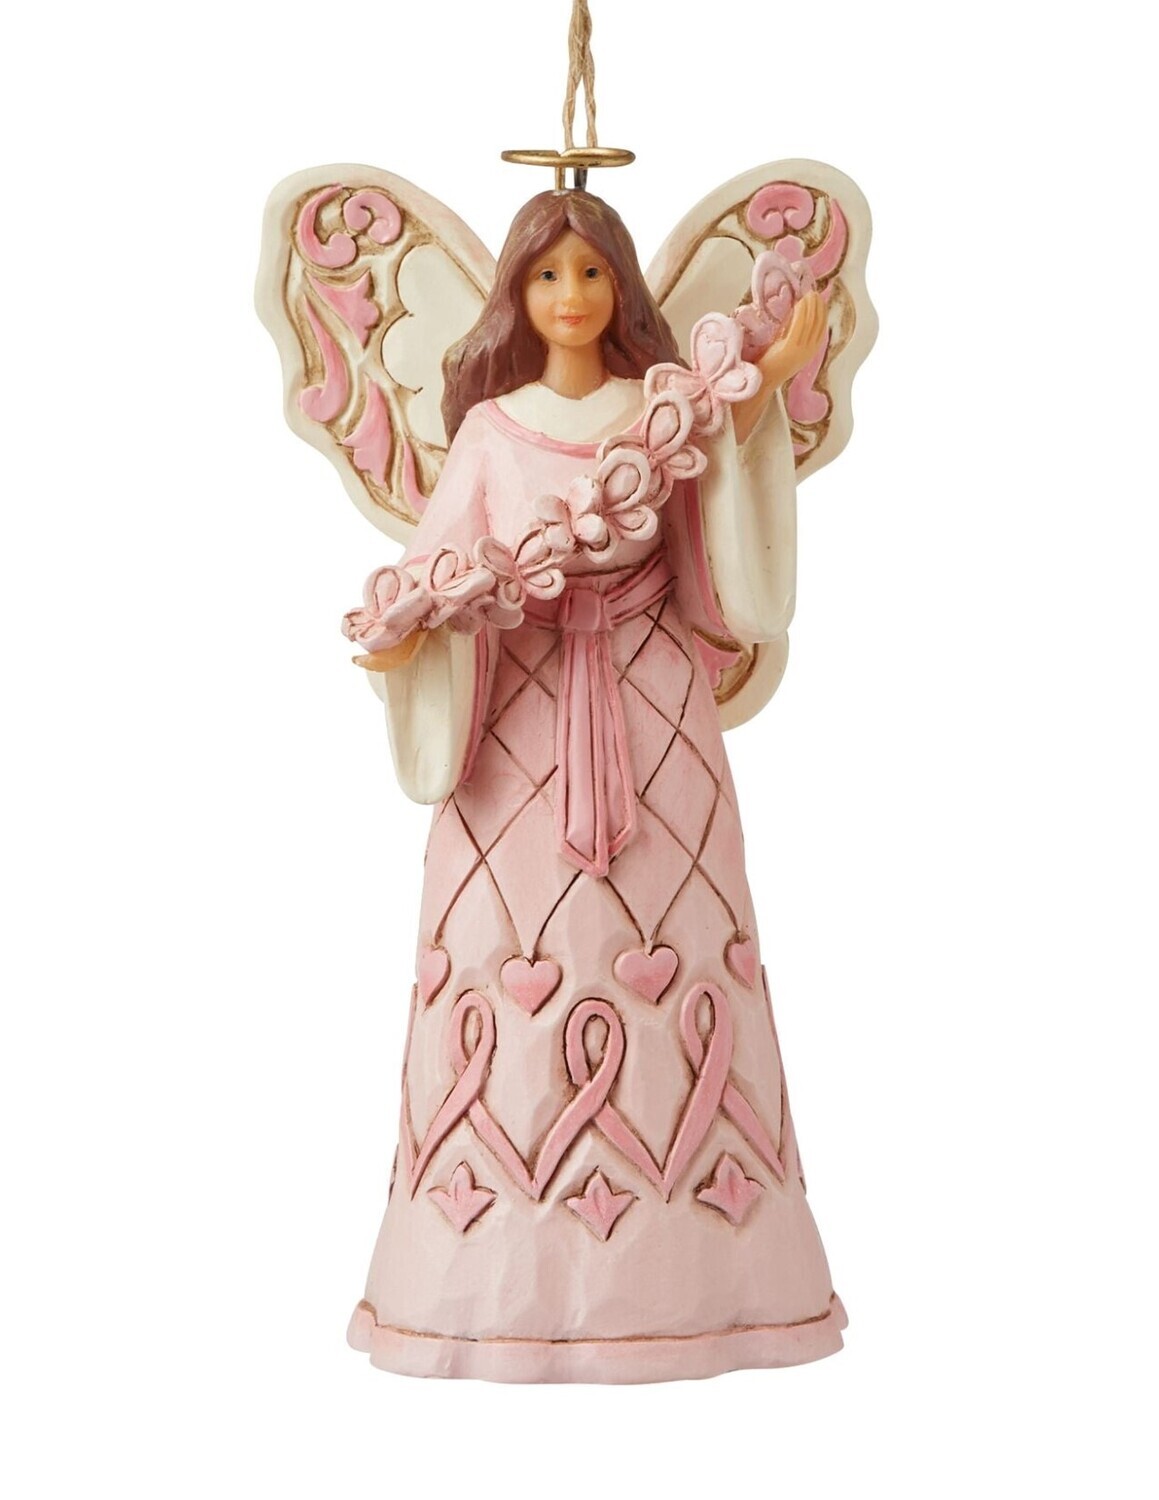 Jim Shore Heartwood Creek "Pink Angel with Butterfly Cancer Awareness" Ornament (6008101)